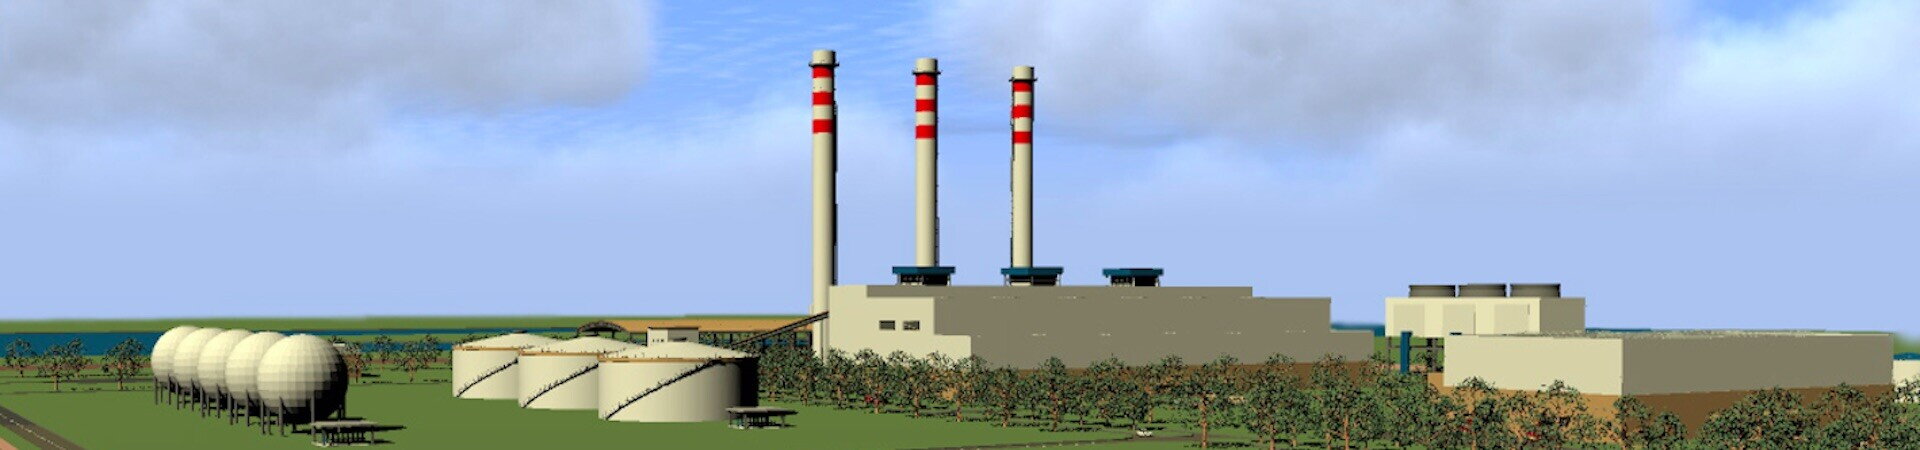 <p><span style="color: #ffffff;">10 MWh Coal Integrated Gasification Combined Cycle<br/> Power Plant</span></p>